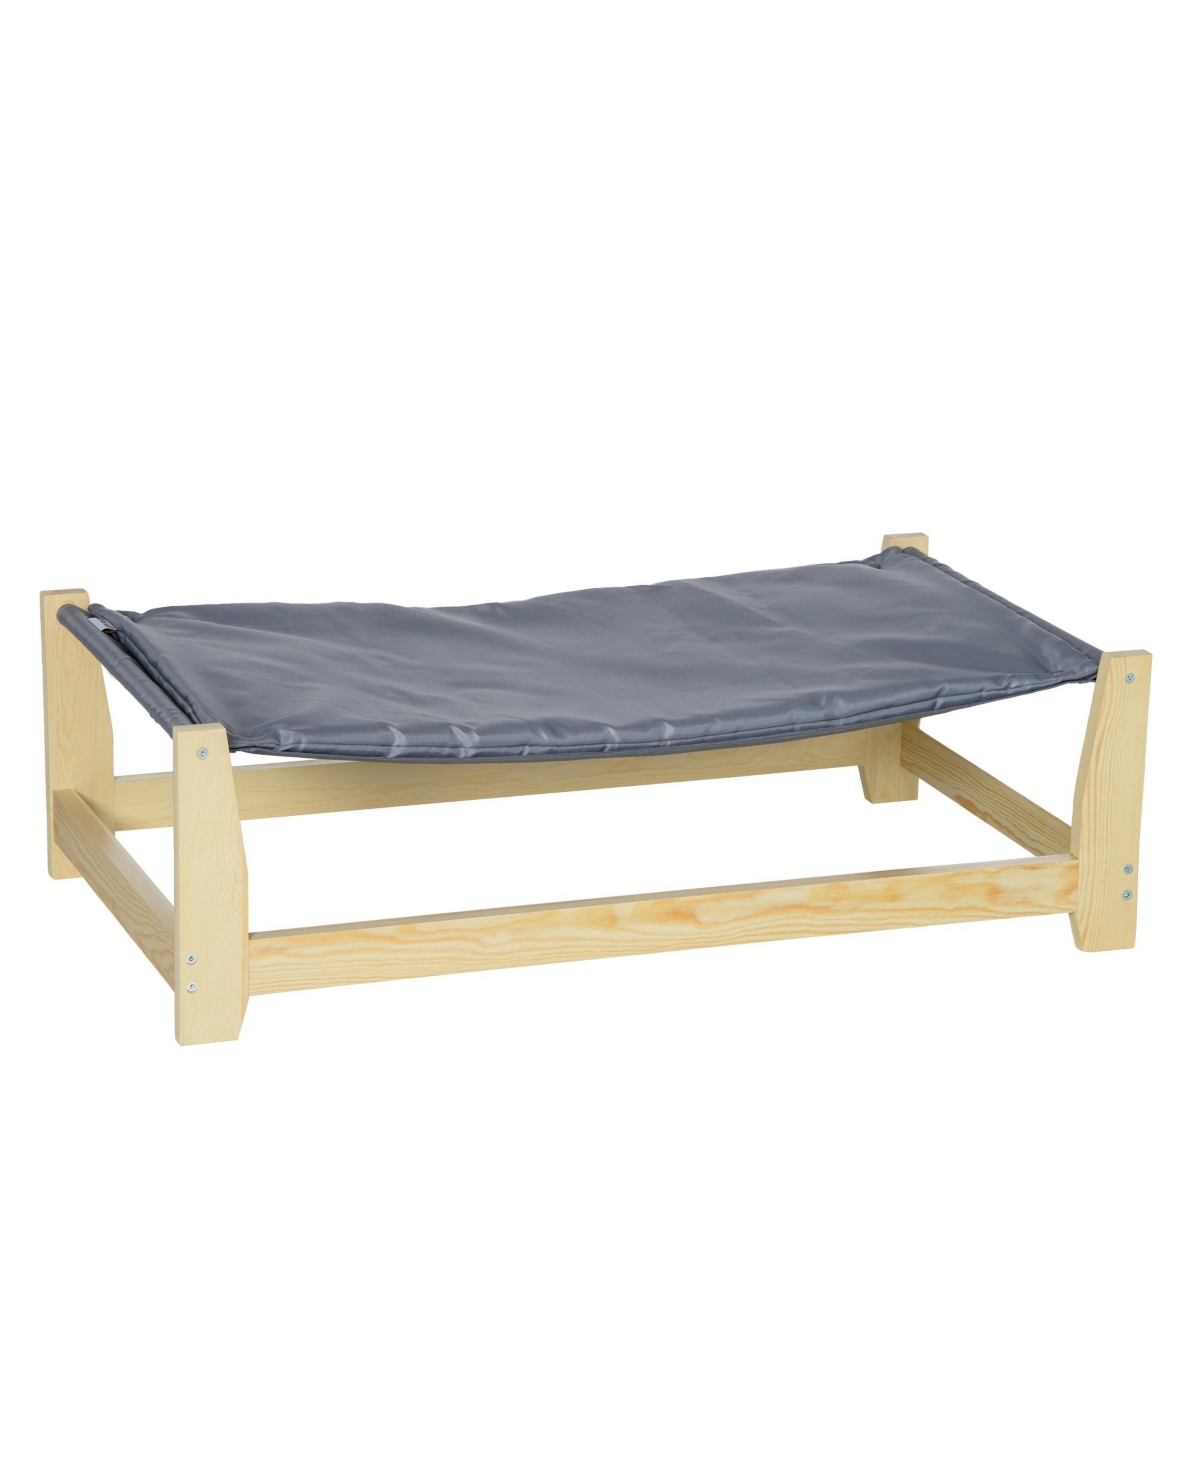 Raised Pet Bed Wooden Frame Dog Cot with Washable Cushion for Small Medium Sized Dogs Indoor Outdoor, 35.5" x 20" x 11" - Grey